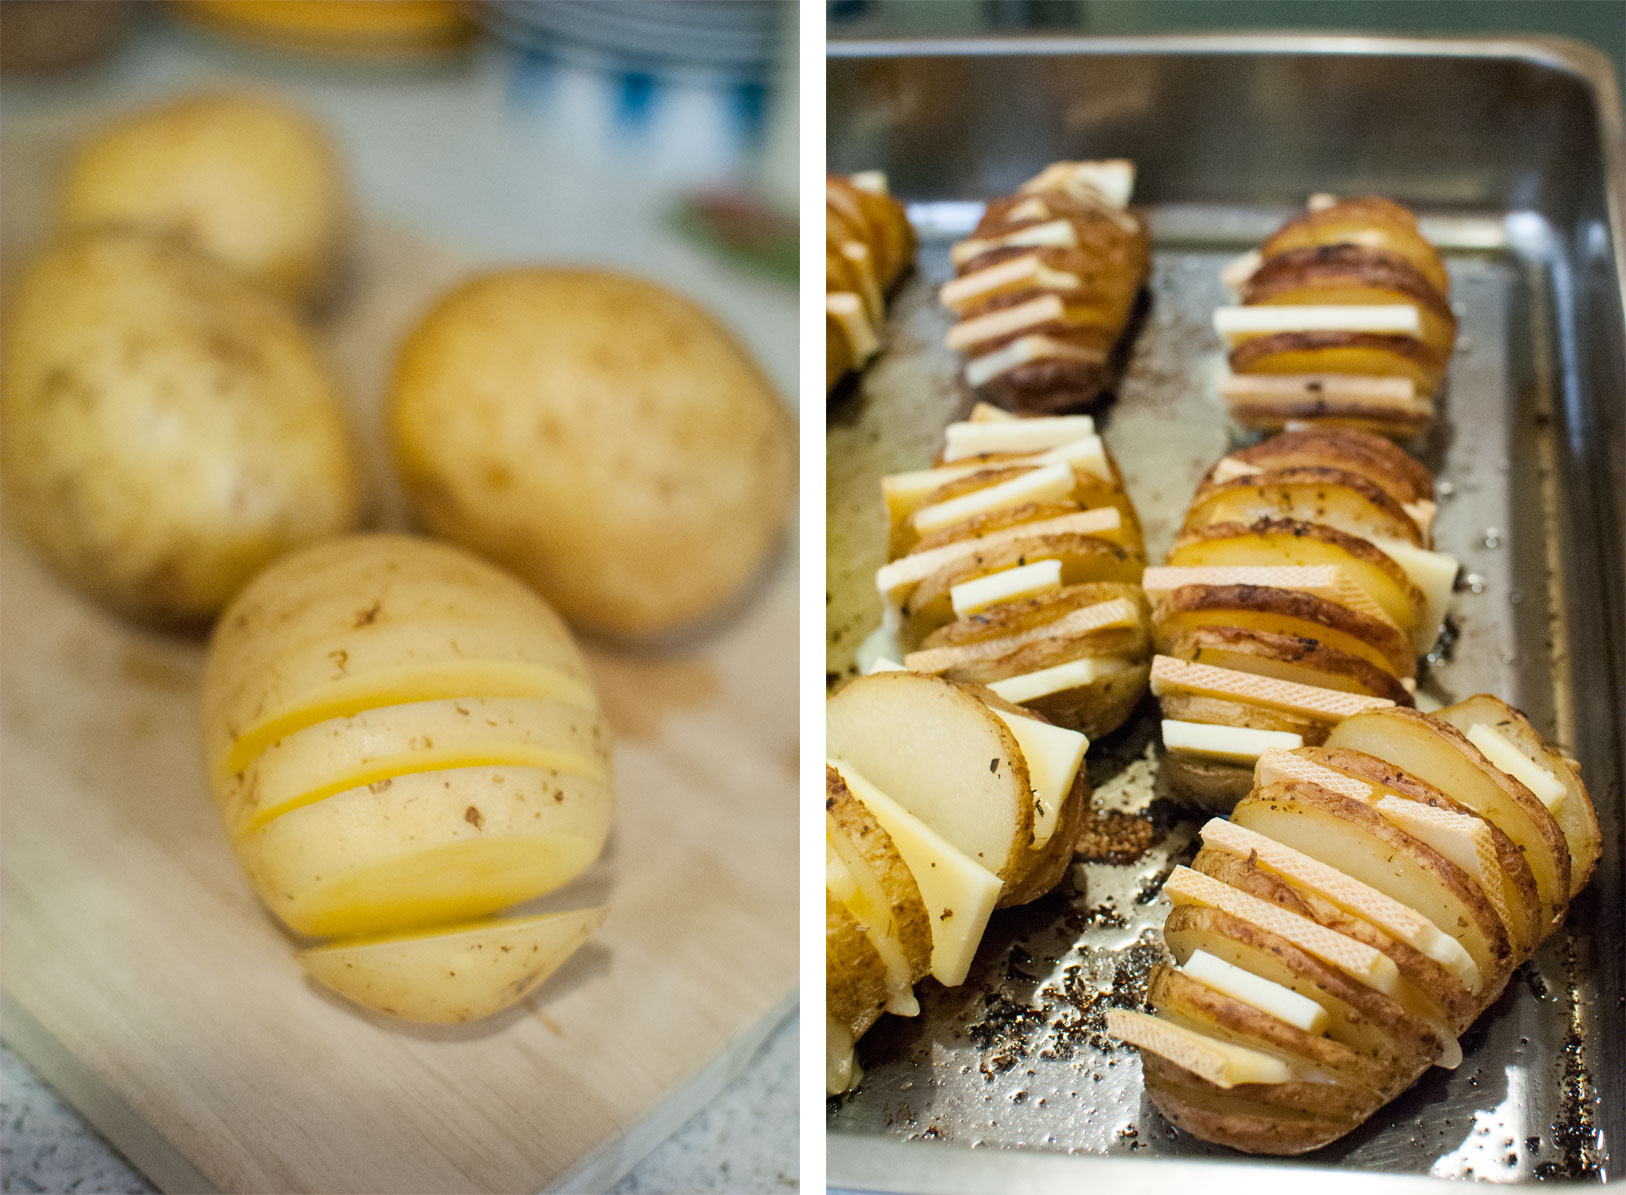 Baked Hasselback potatoes with raclette cheese